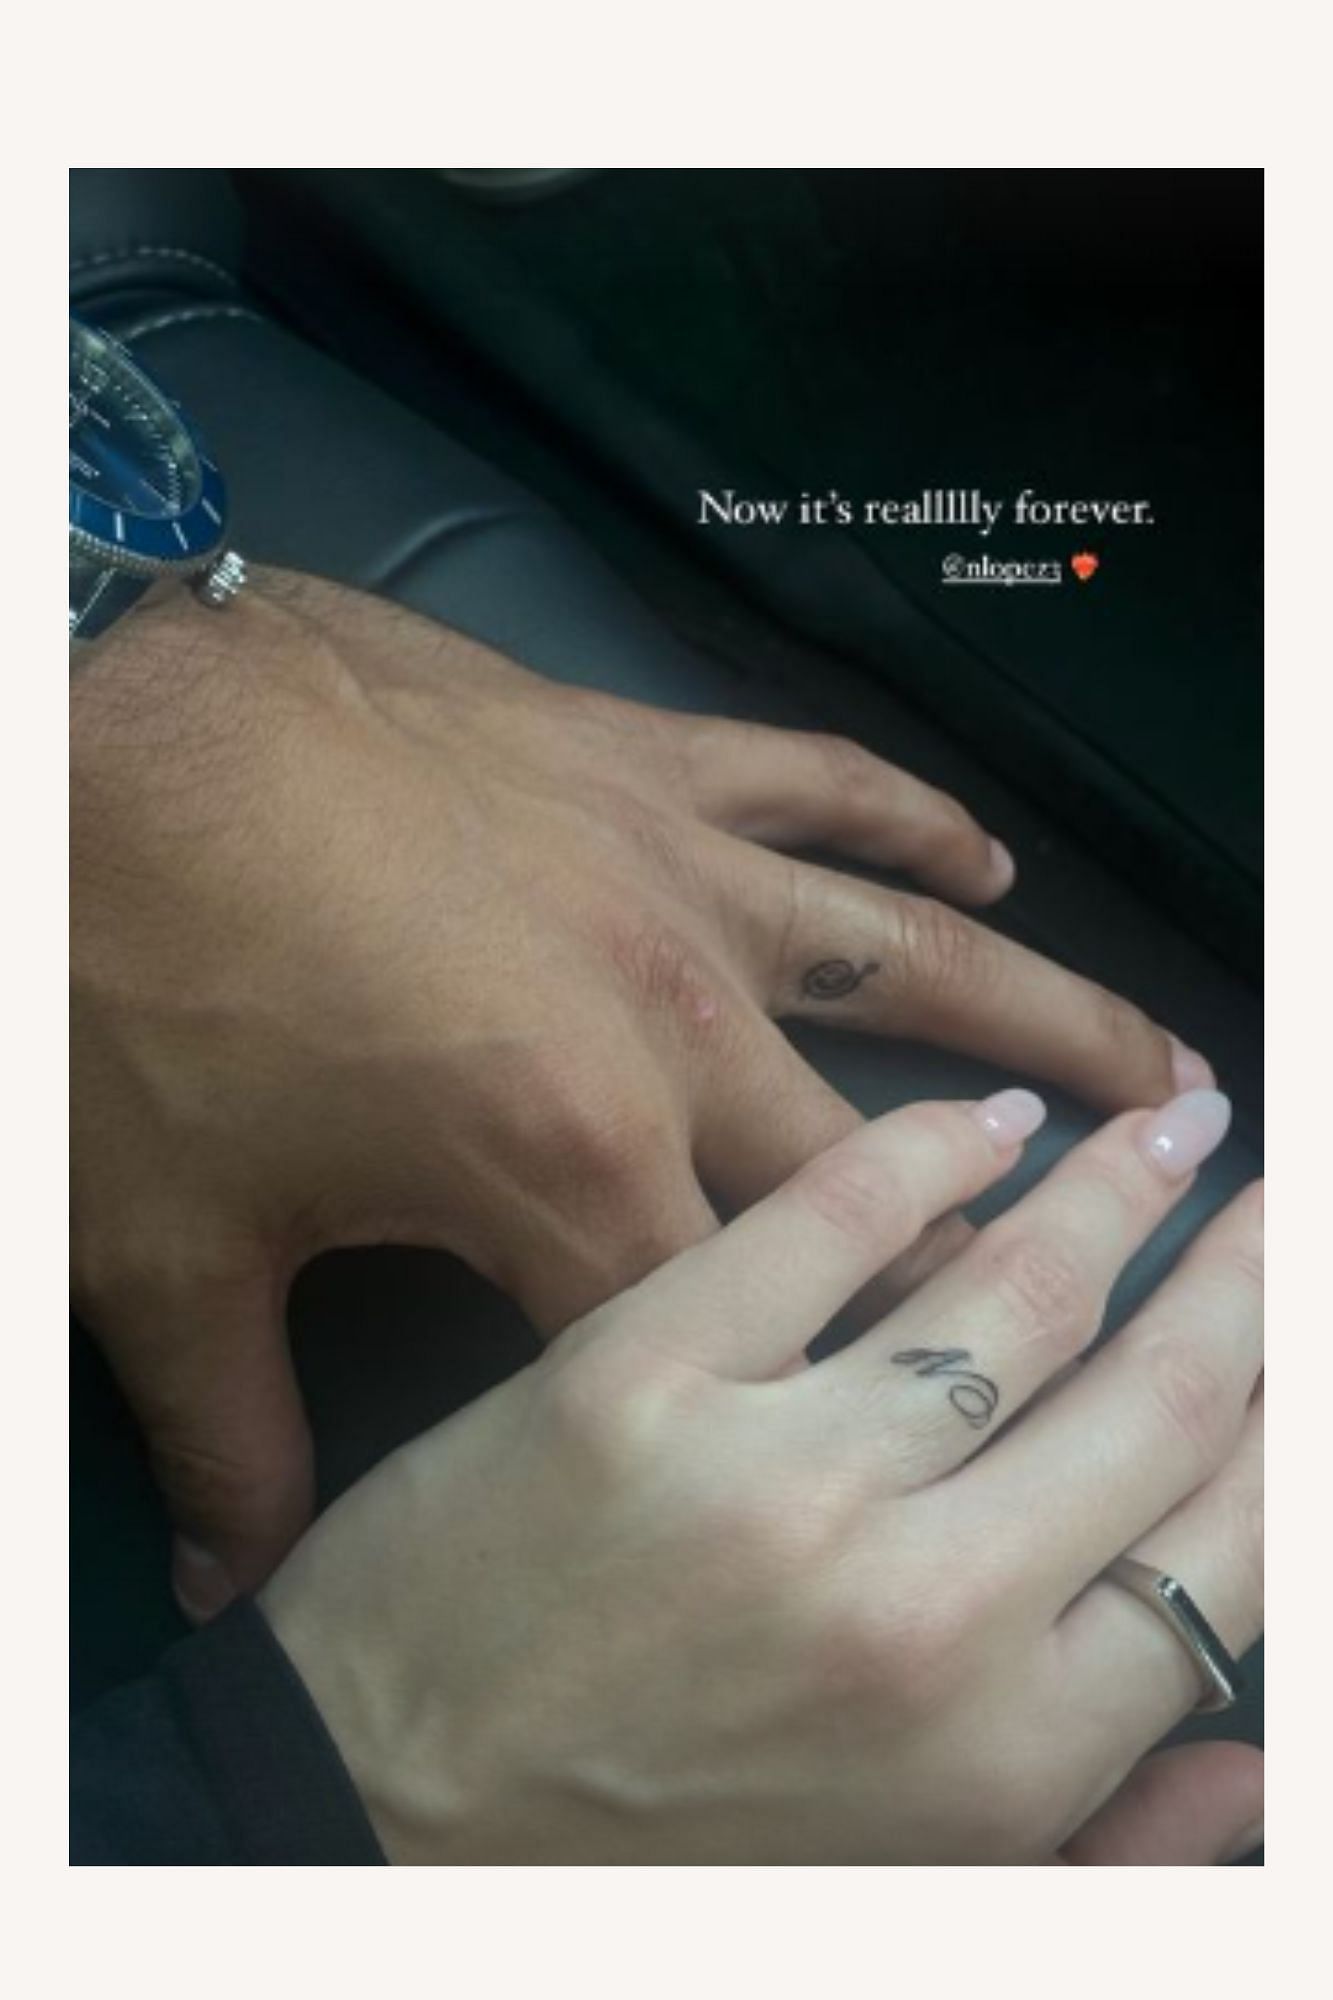 Newlyweds Nicky Lopez and wife Sydney tattoo each other&#039;s initials as symbol of everlasting love